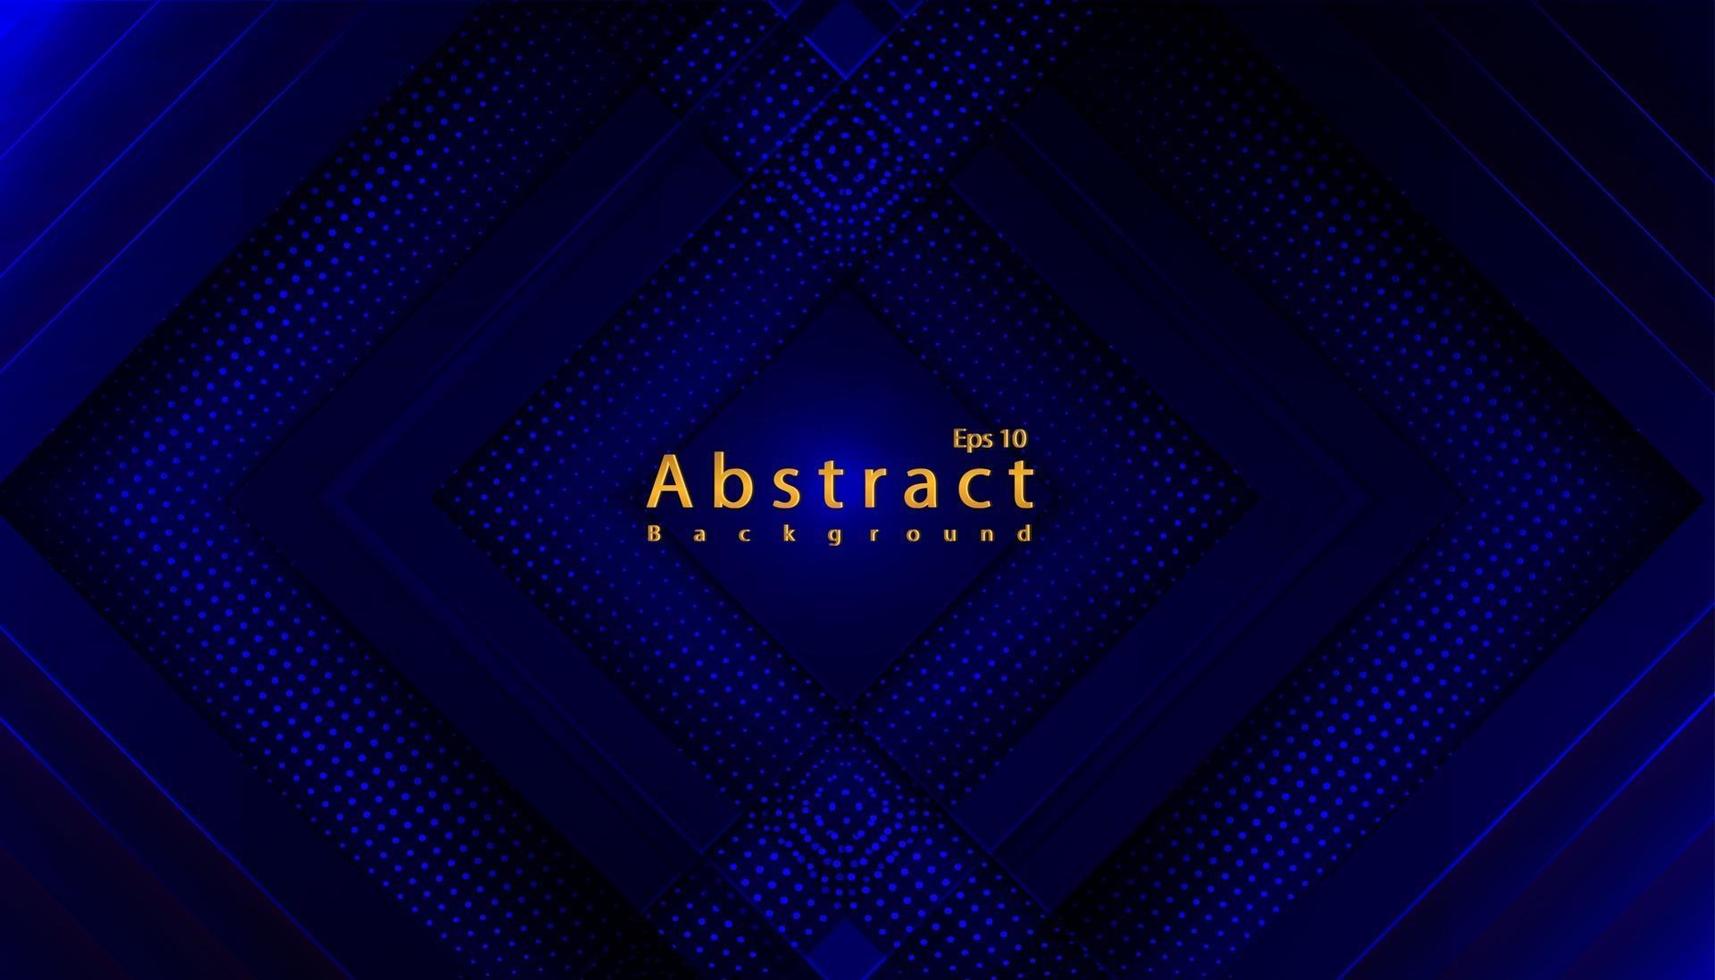 luxury abstract blue dark technology background with papercut vector